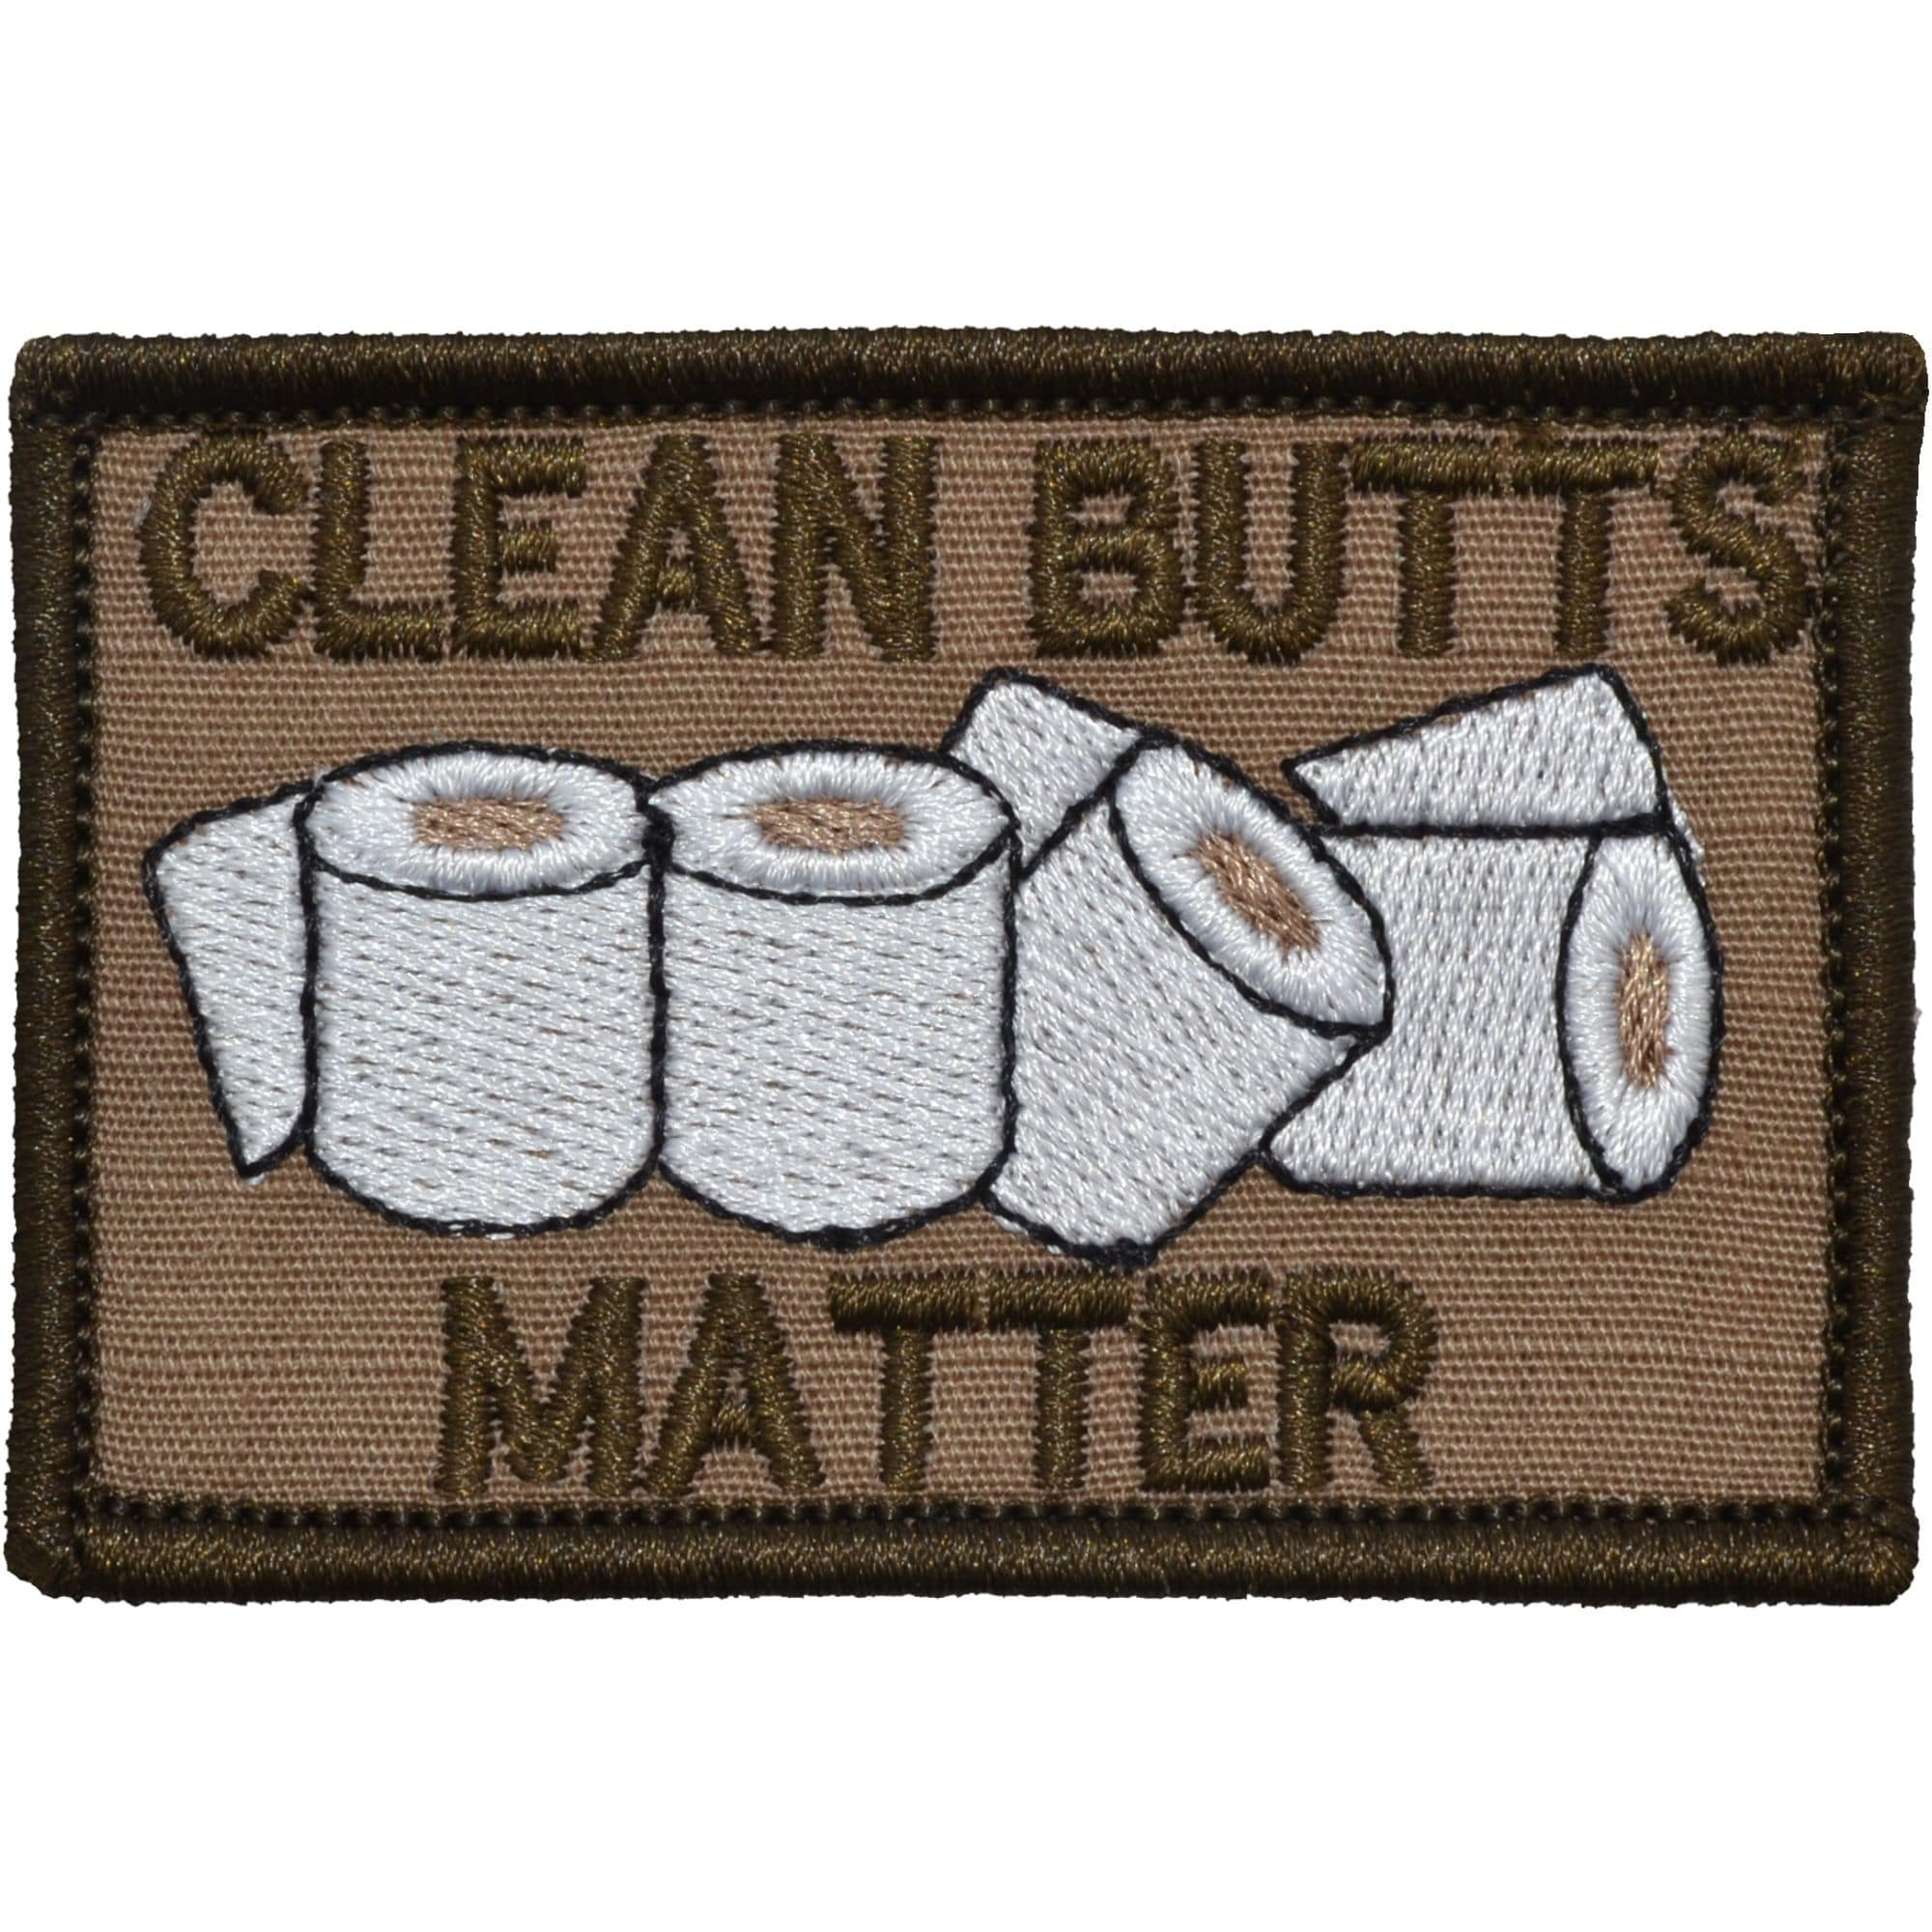 No Morale Here - 2x3 Patch